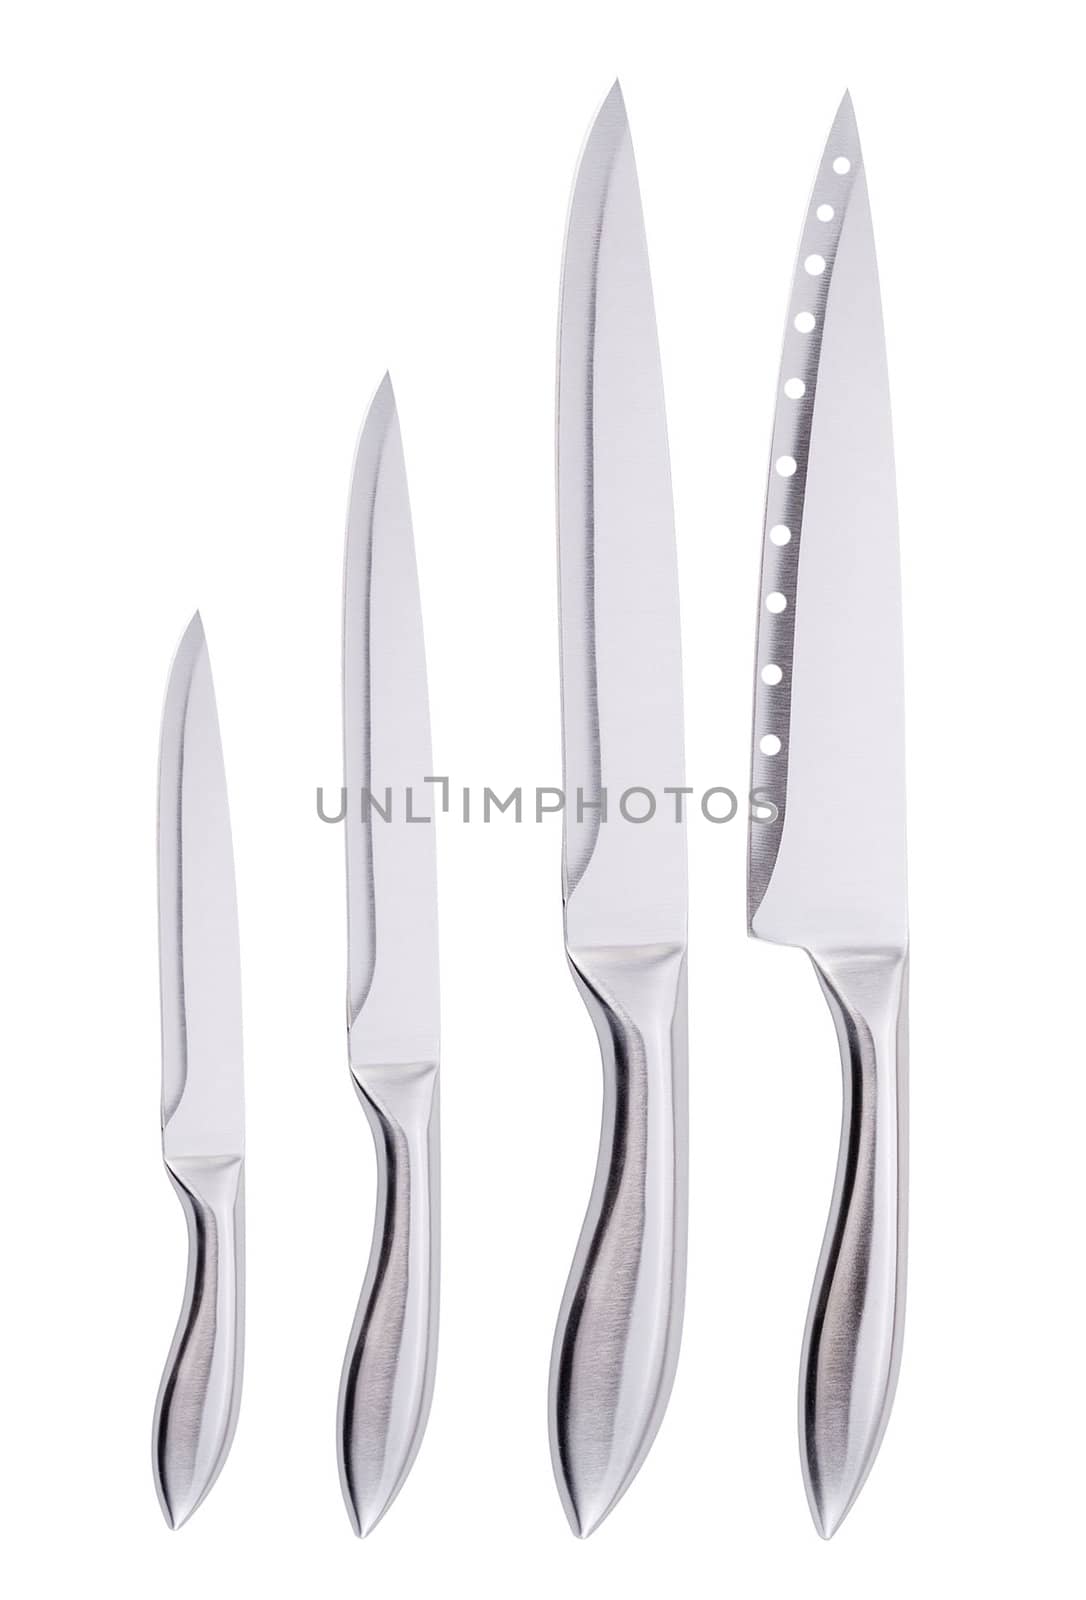 Set of knifes isolated on white by ozaiachin